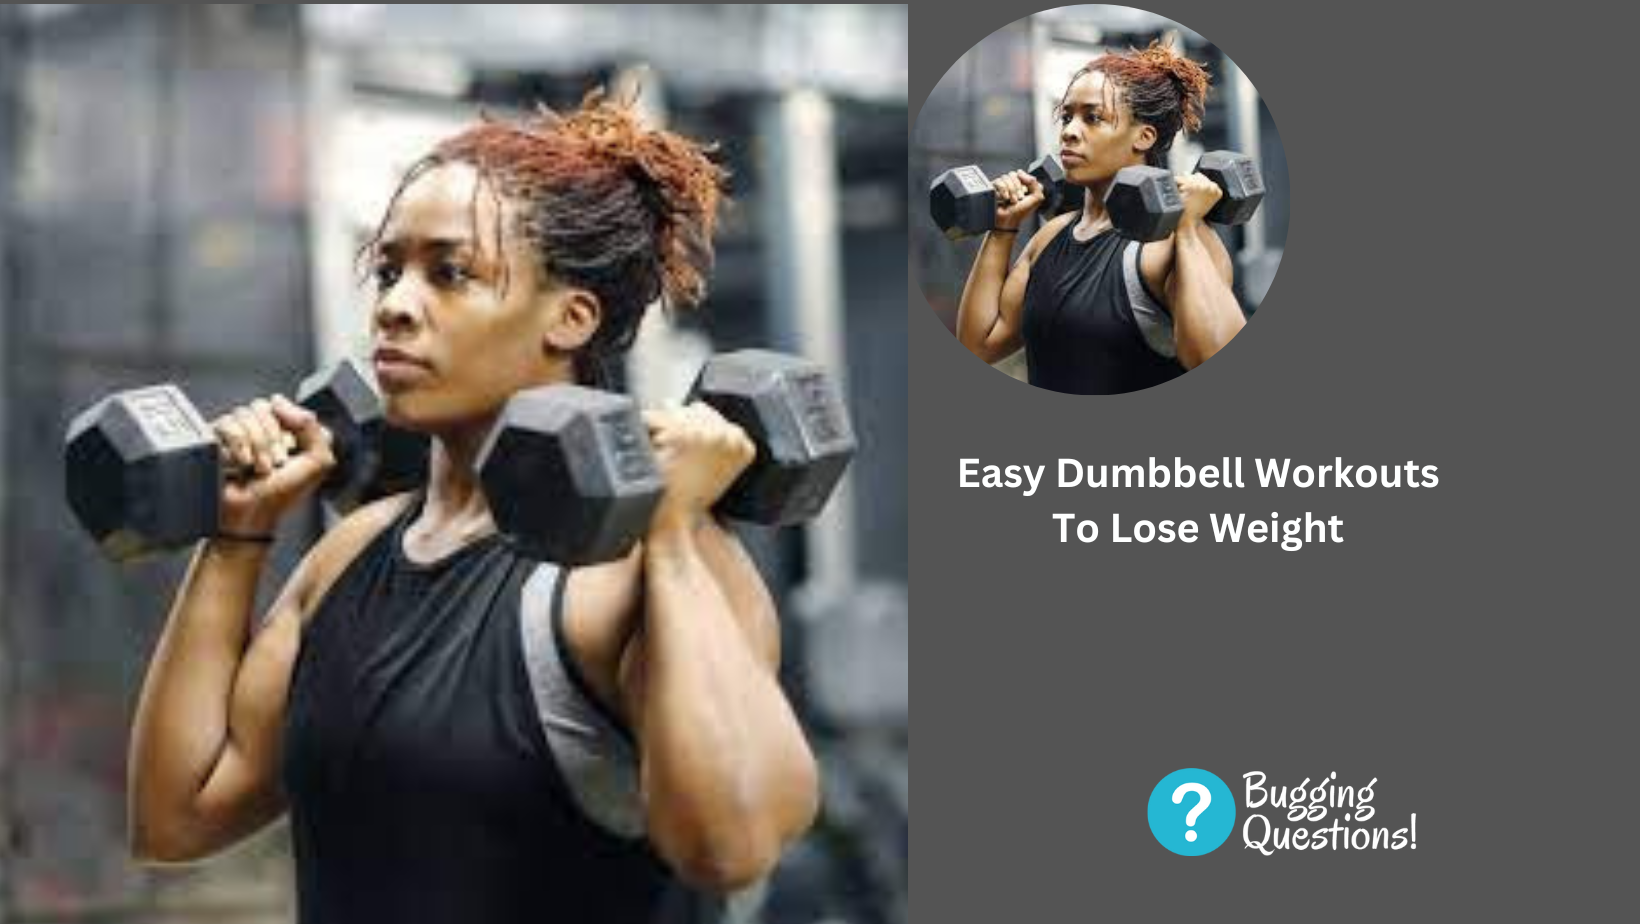 Easy Dumbbell Workouts To Lose Weight